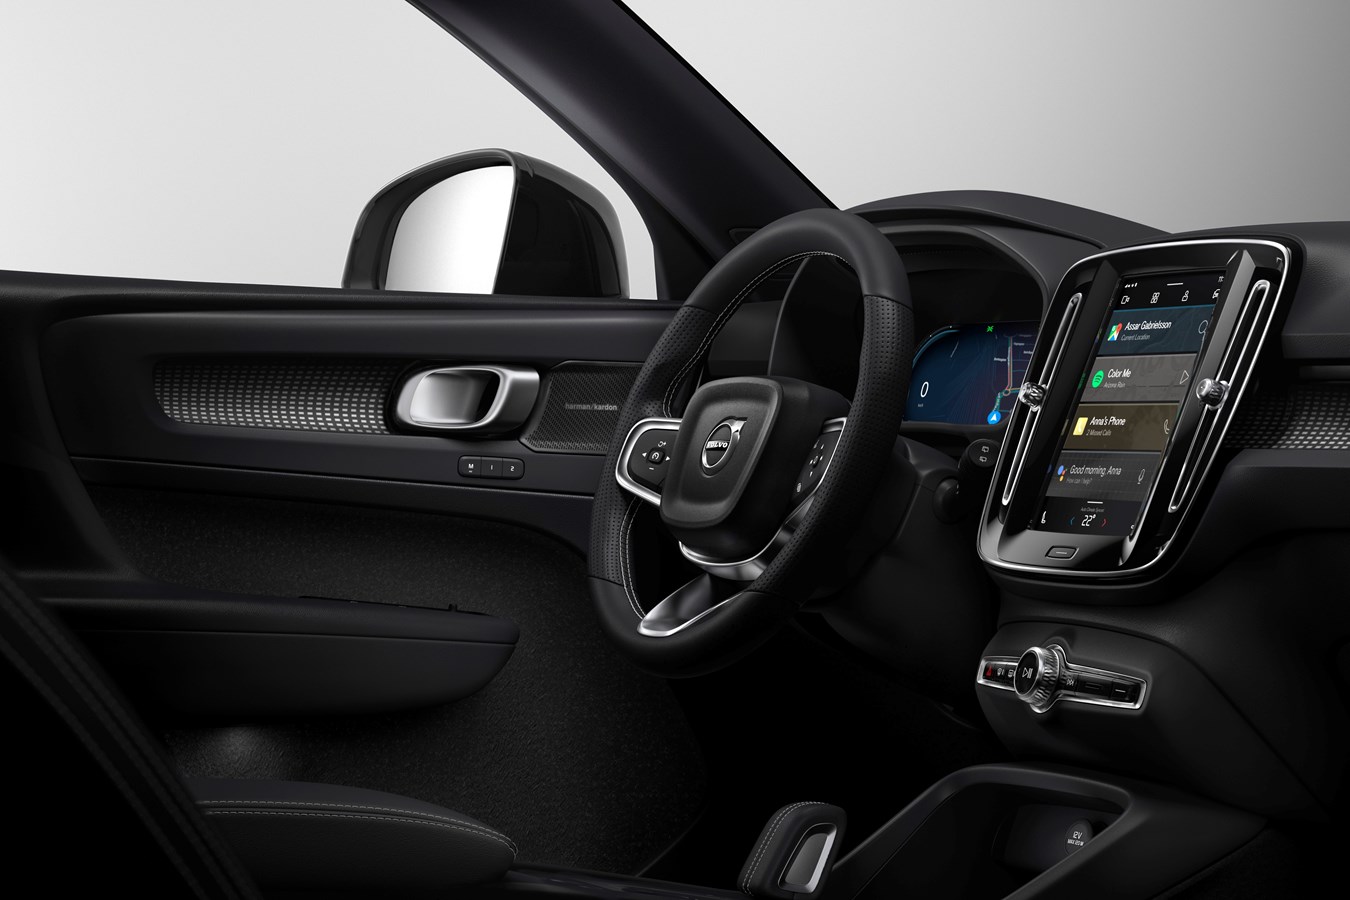 Fully electric Volvo XC40 introduces brand new infotainment system powered  by Android with Google technologies built-in - Volvo Car USA Newsroom